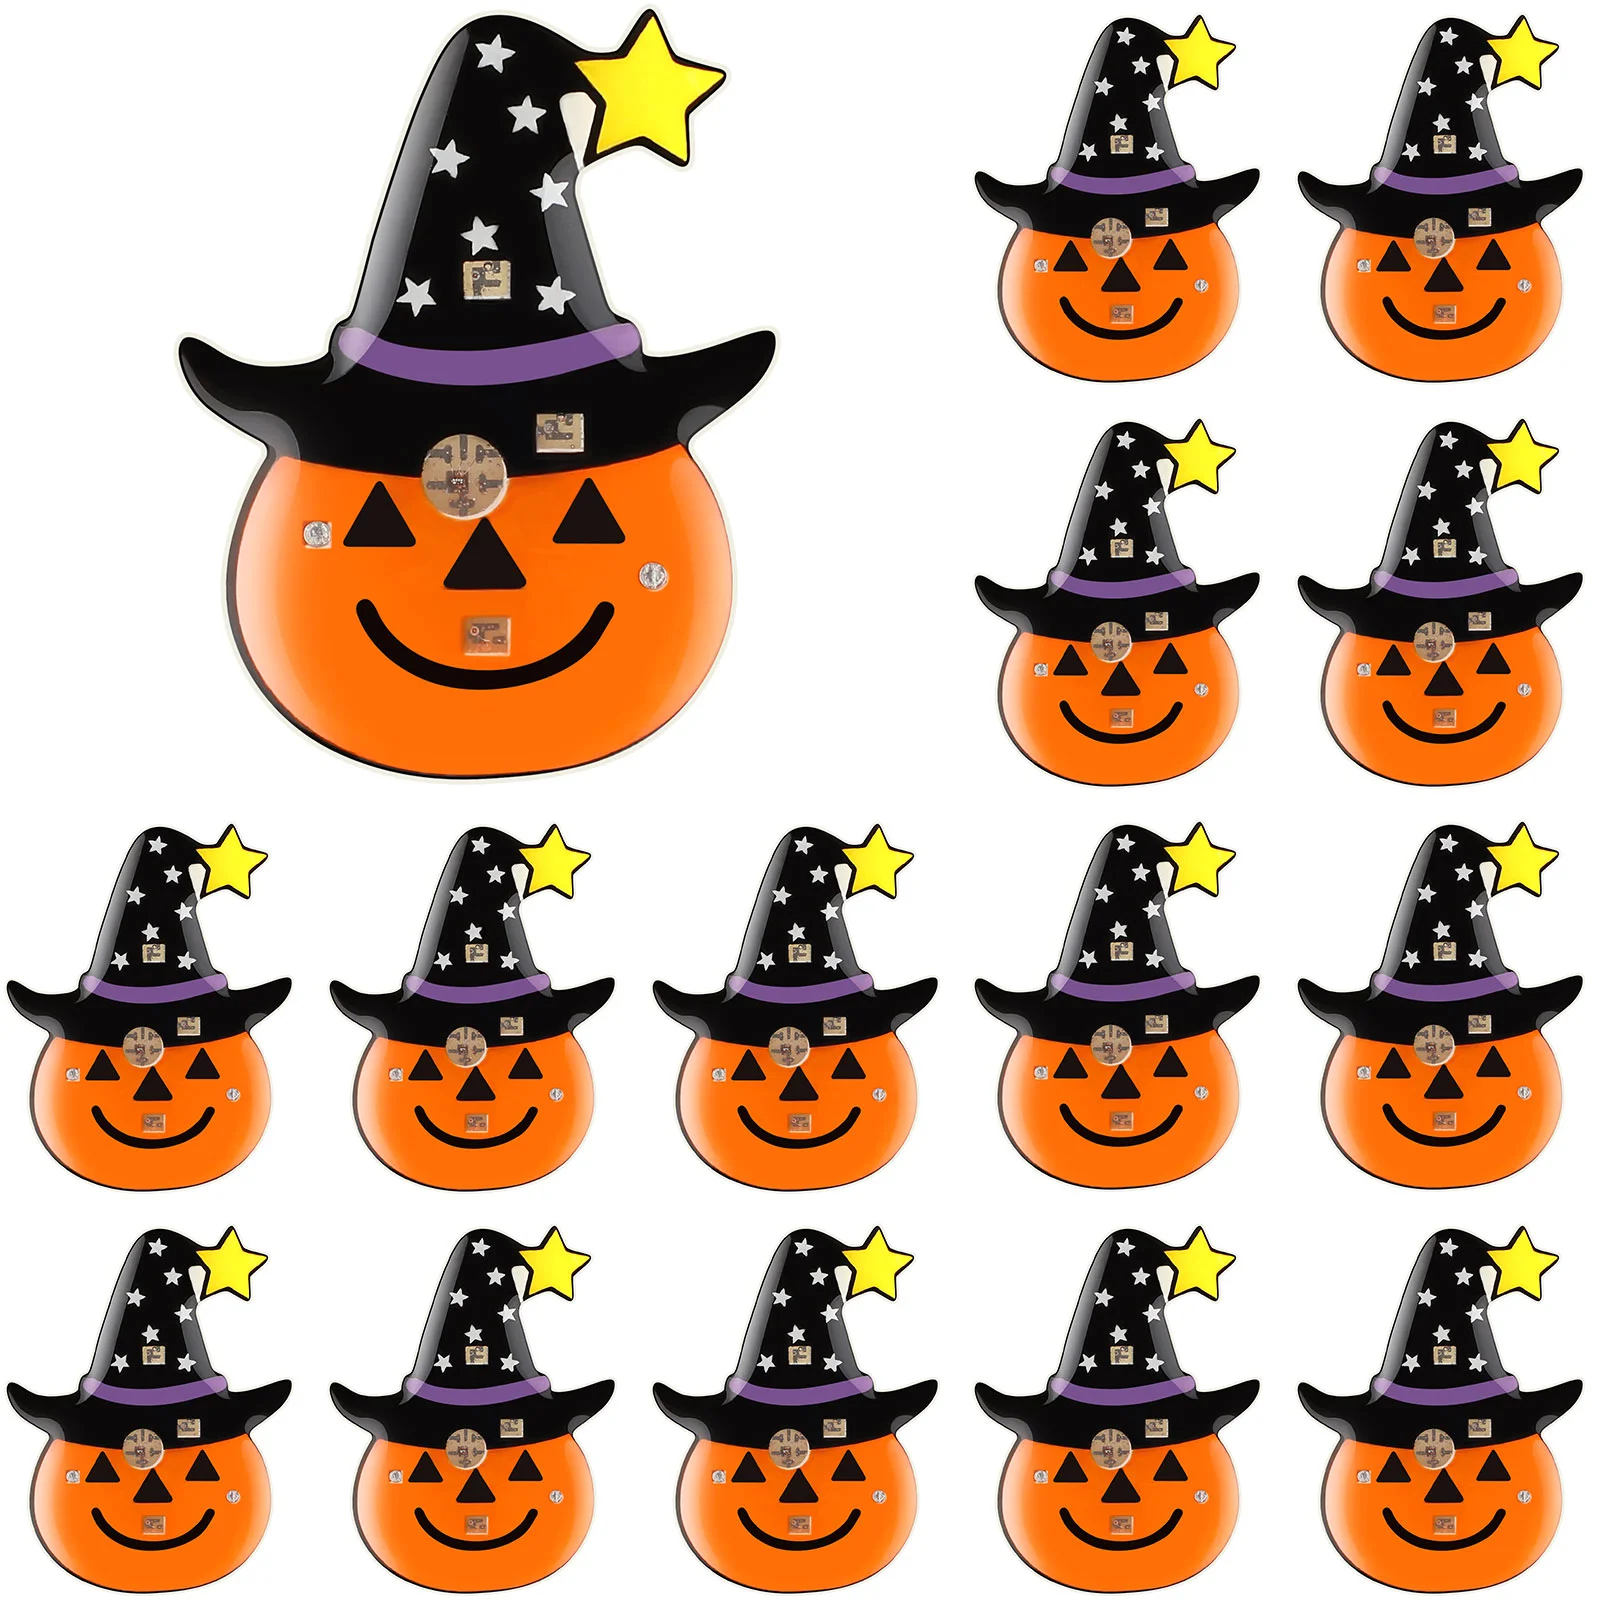 

15 Pcs Halloween LED Flashing Brooches Cartoon Witch Hat Pumpkin Decorative Badges Pins Costume Party Favors